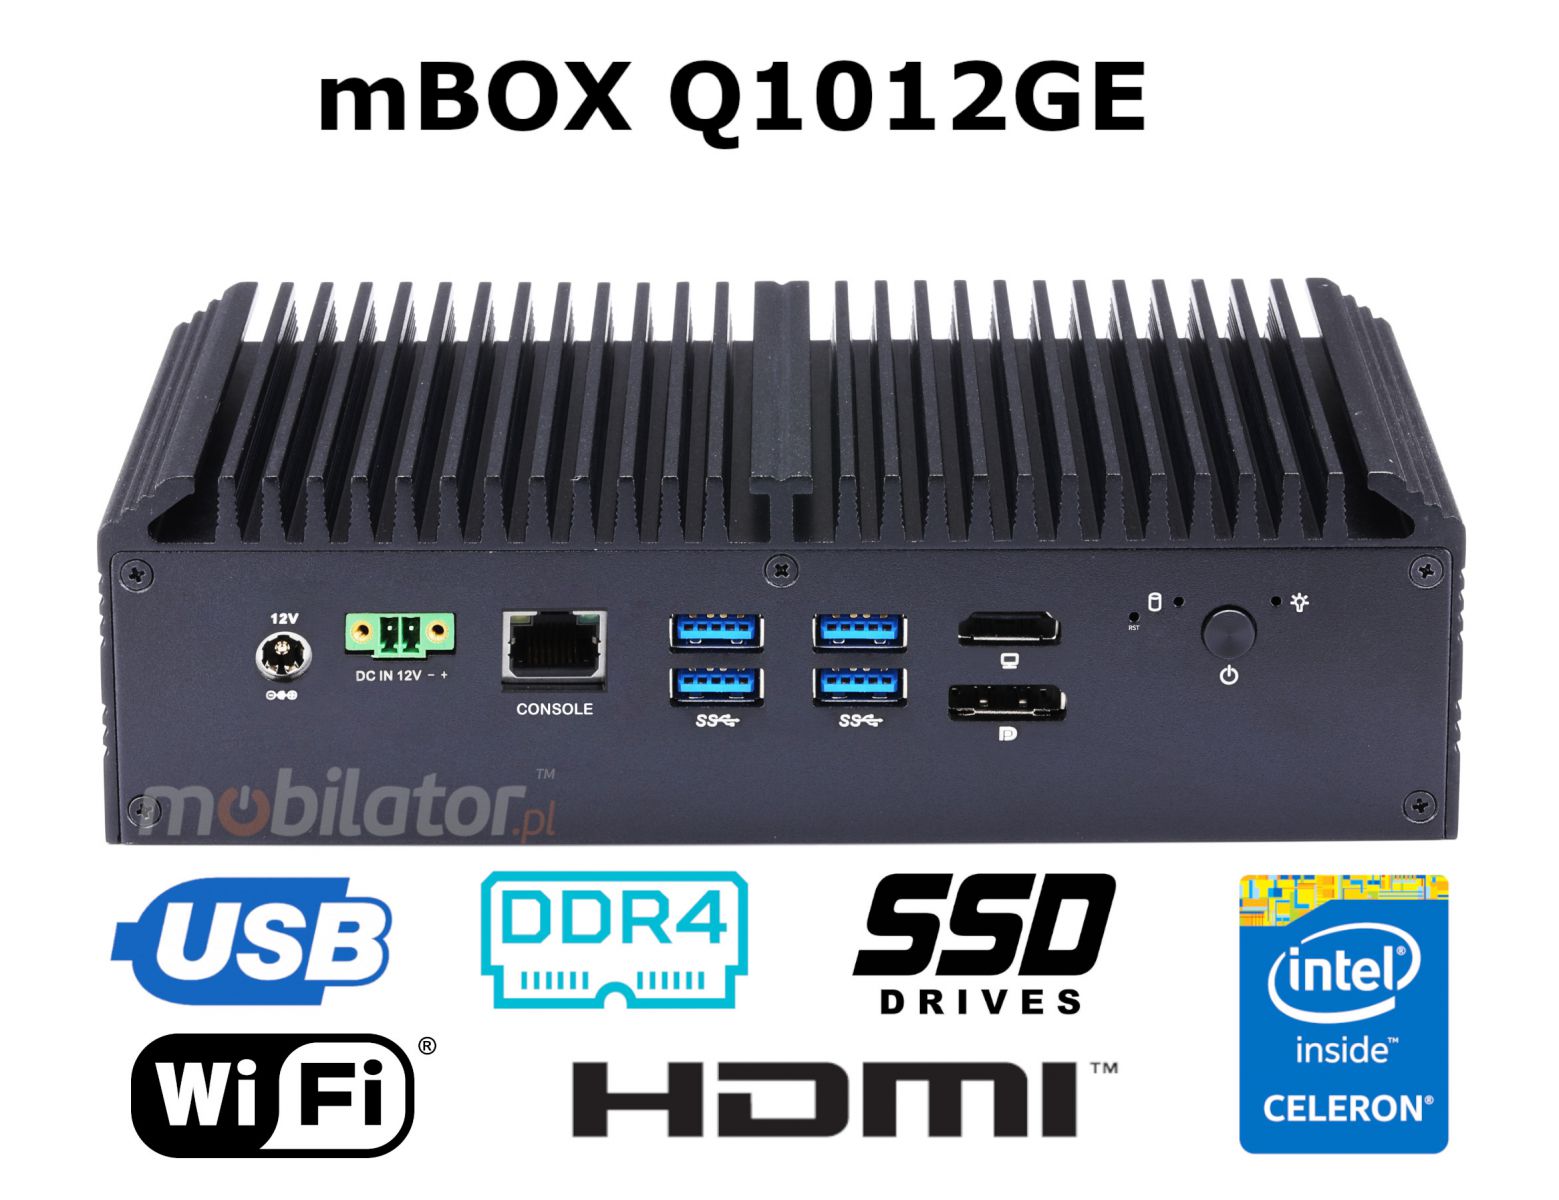 Compact mBOX Q1012GE Version 3 with Internet